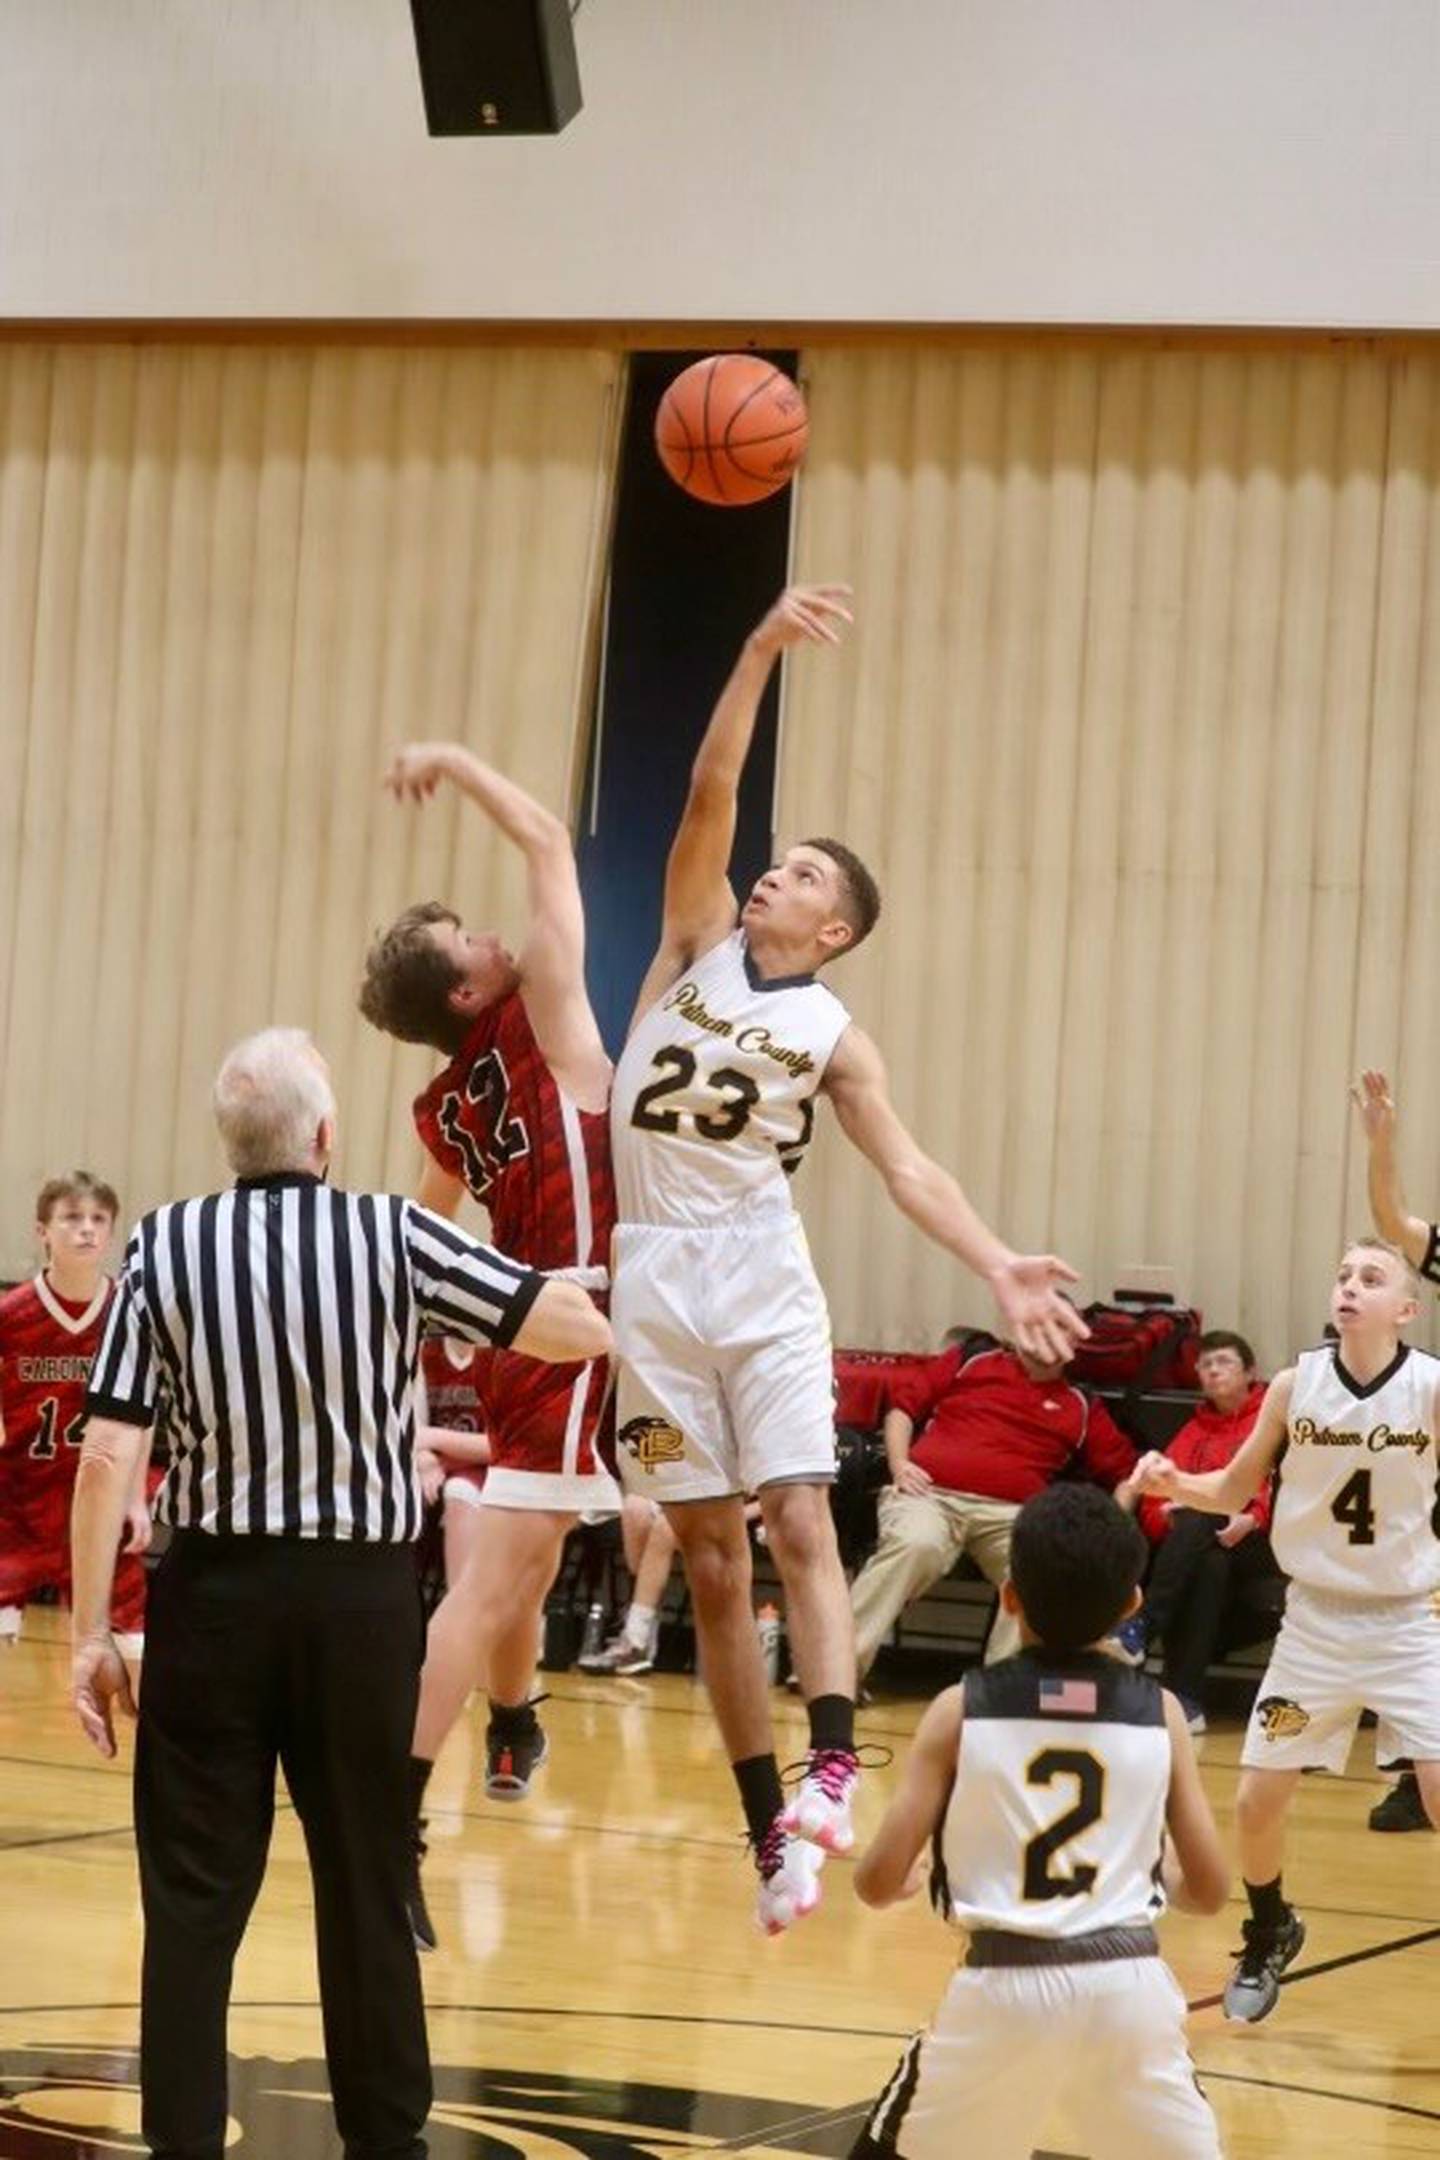 Cohen Pierski takes the center jump for the Pumas on eighth-grade night against Henry. The Pumas won 43-25.